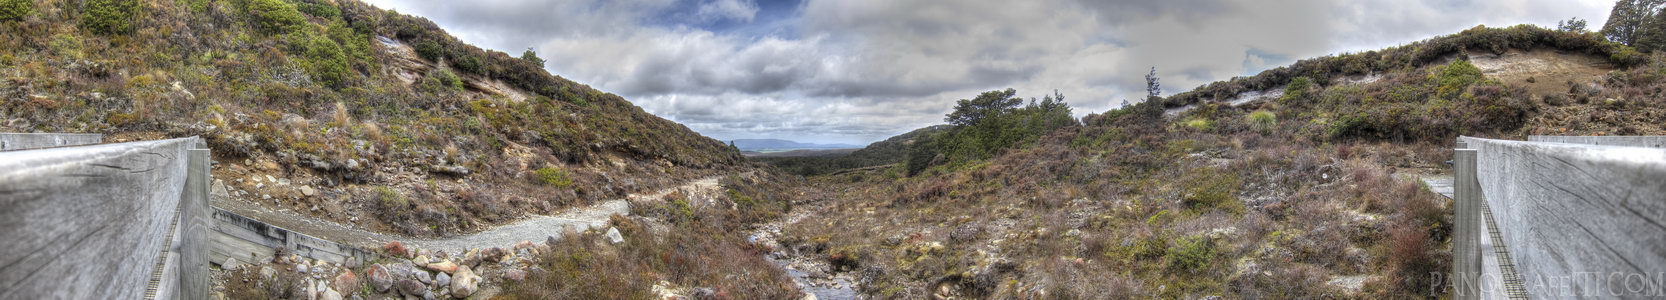 Bridge on Silica Rapids Hike in HDR - HDR 180 degree view from a bridge while hiking to Silica Rapids in the Tongariro National Park